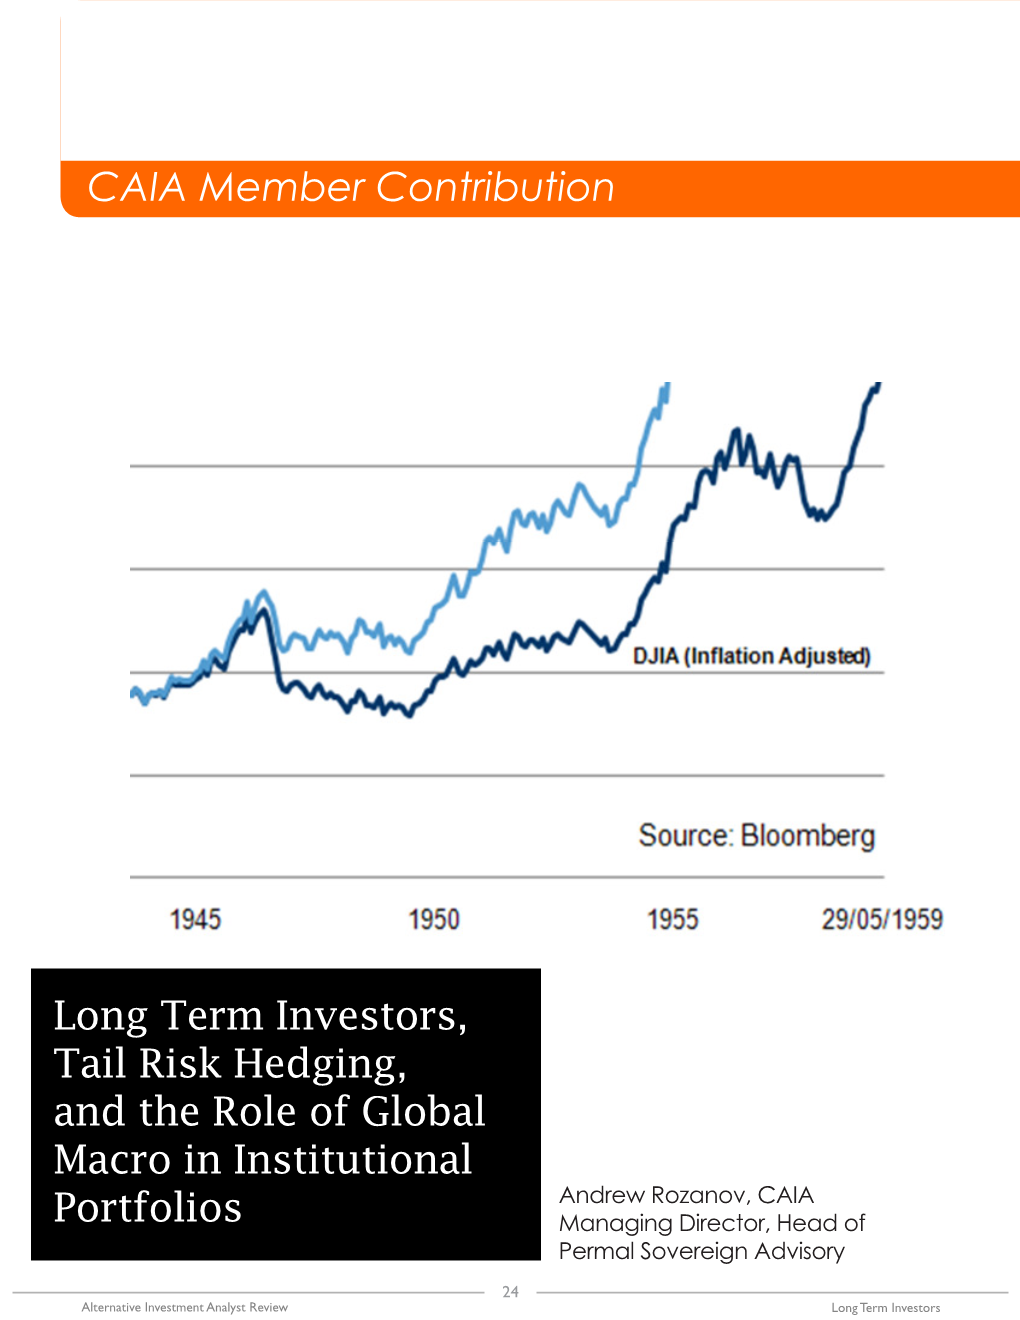 CAIA Member Contribution Long Term Investors, Tail Risk Hedging, And